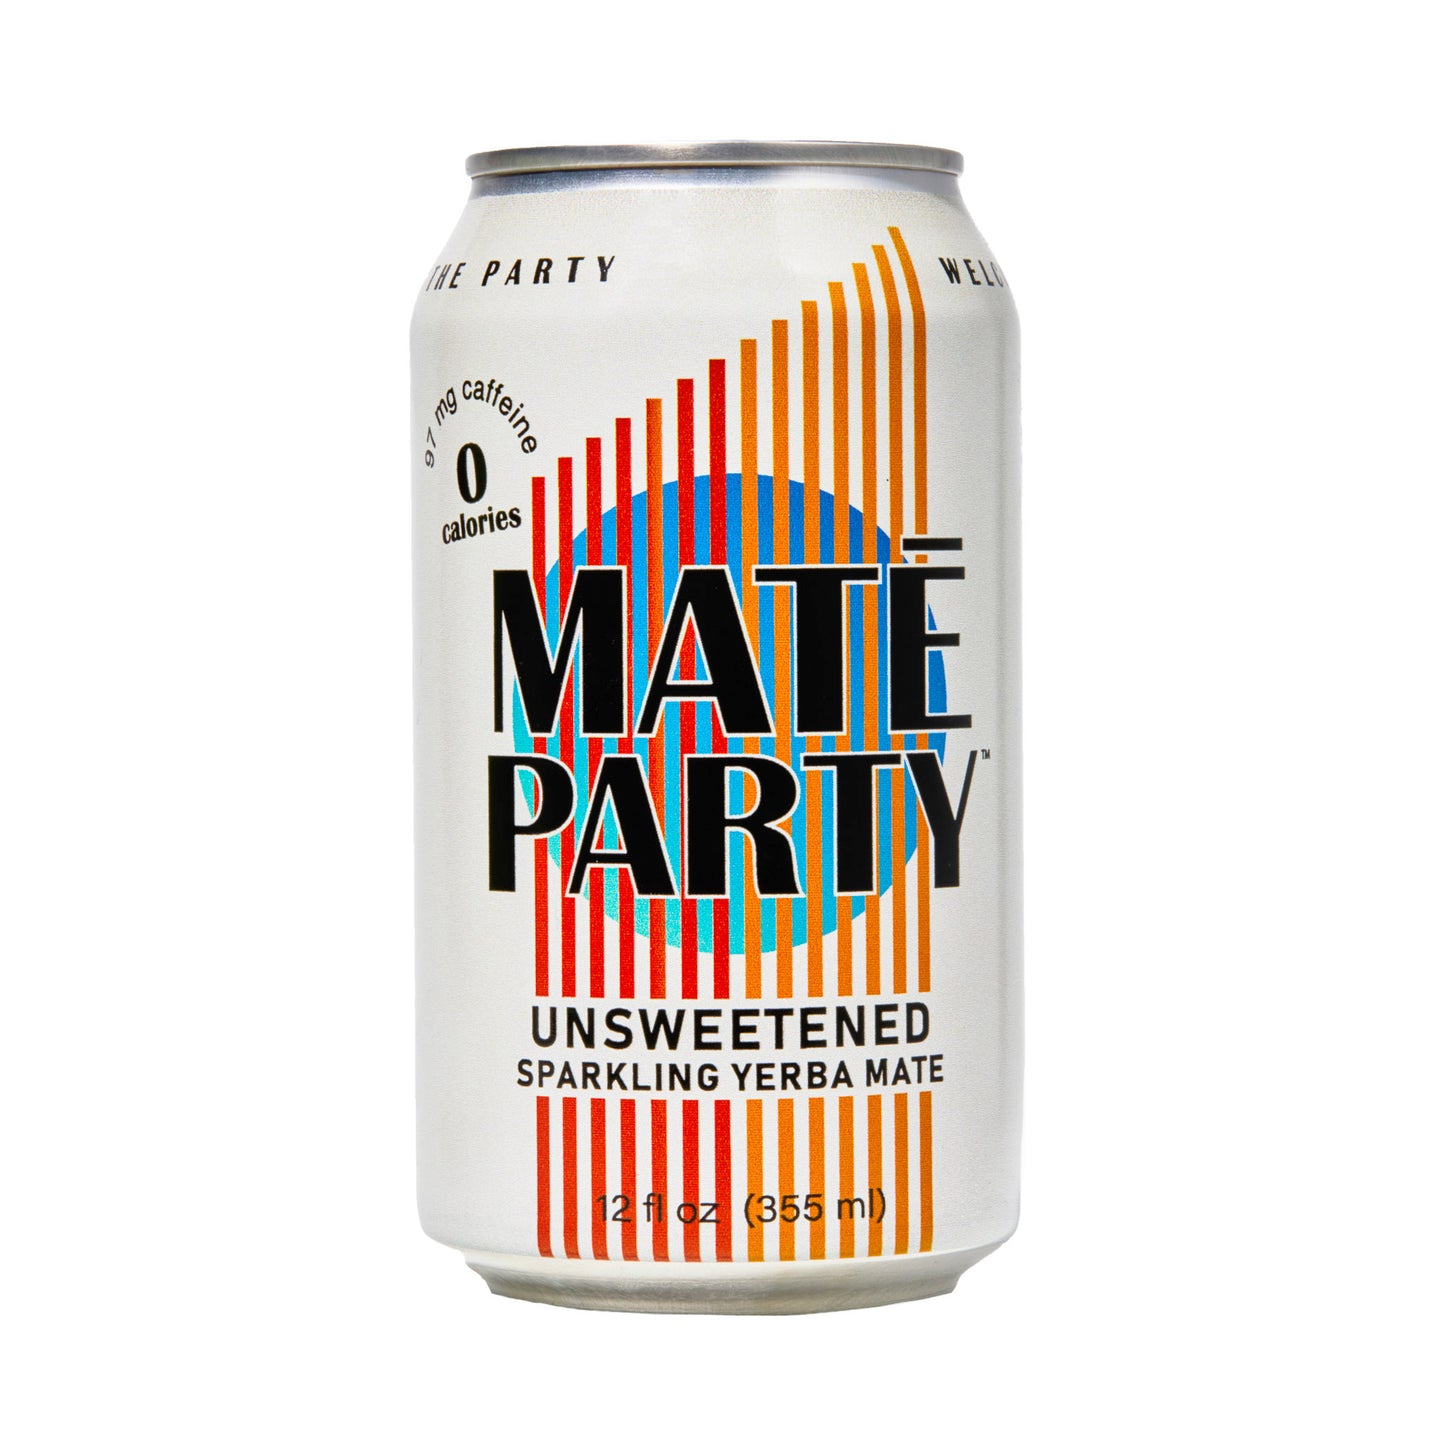 Maté Party - Unsweetened